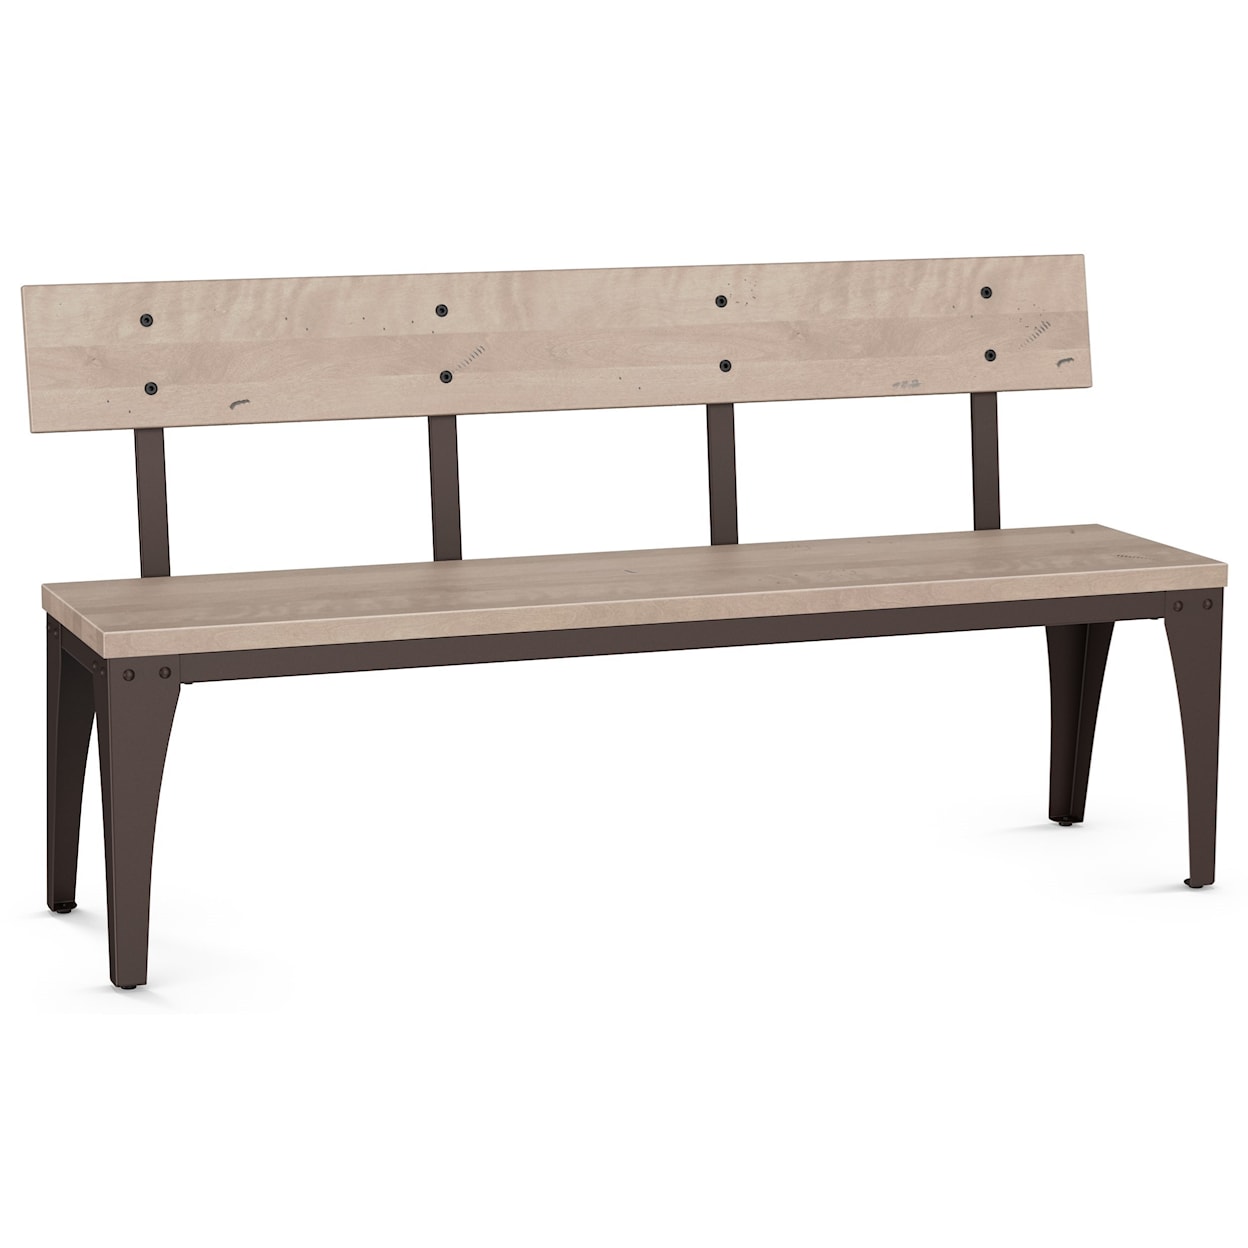 Amisco Industrial Architect Bench with Wood Seat